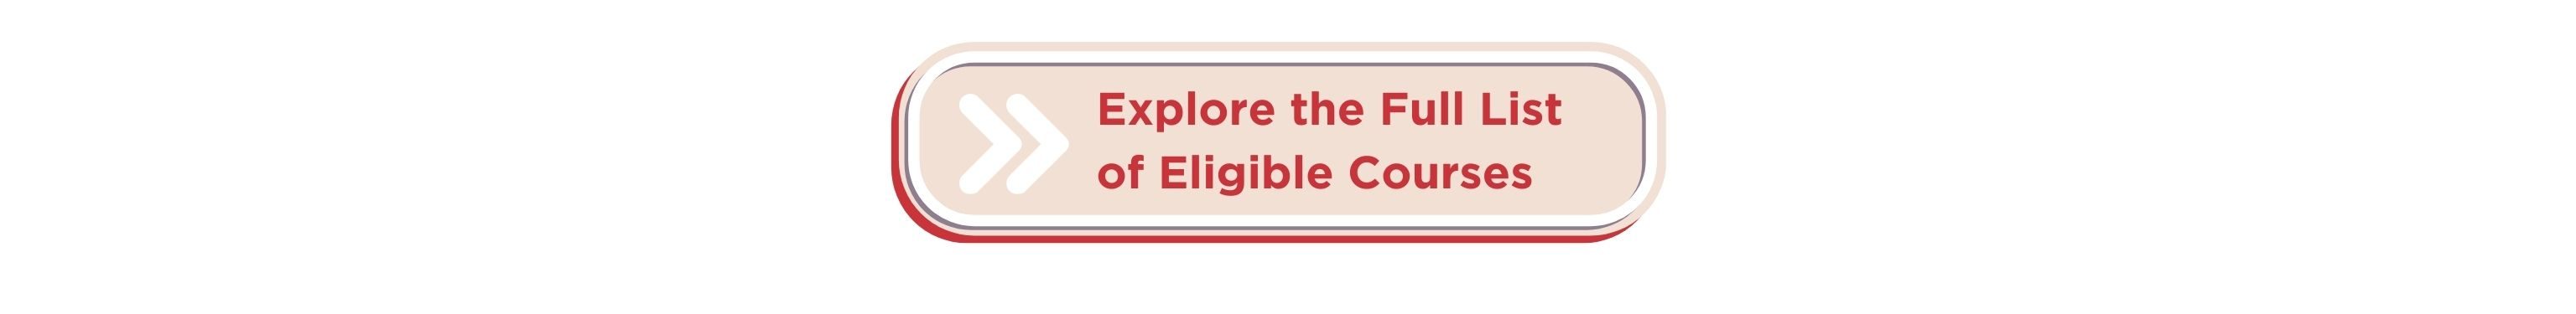 Explore the Full List of Eligible Courses